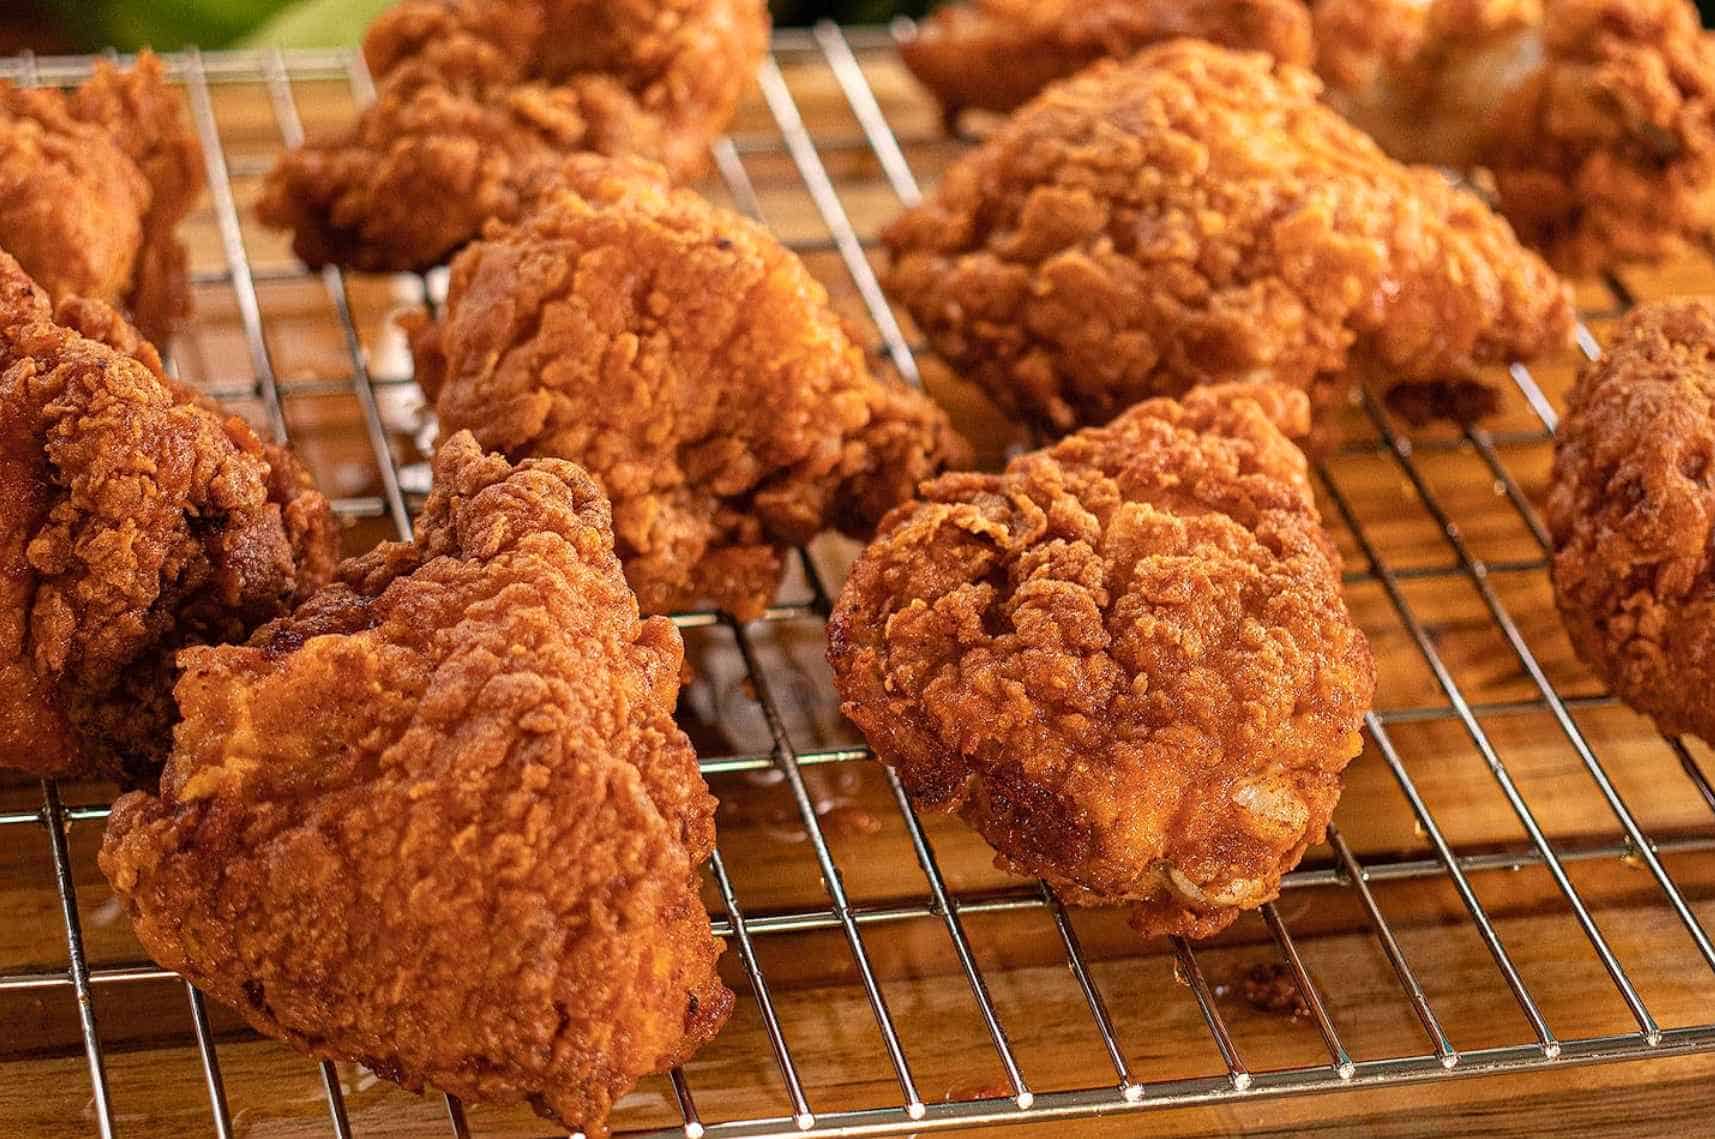 Best Side Dishes for Fried Chicken